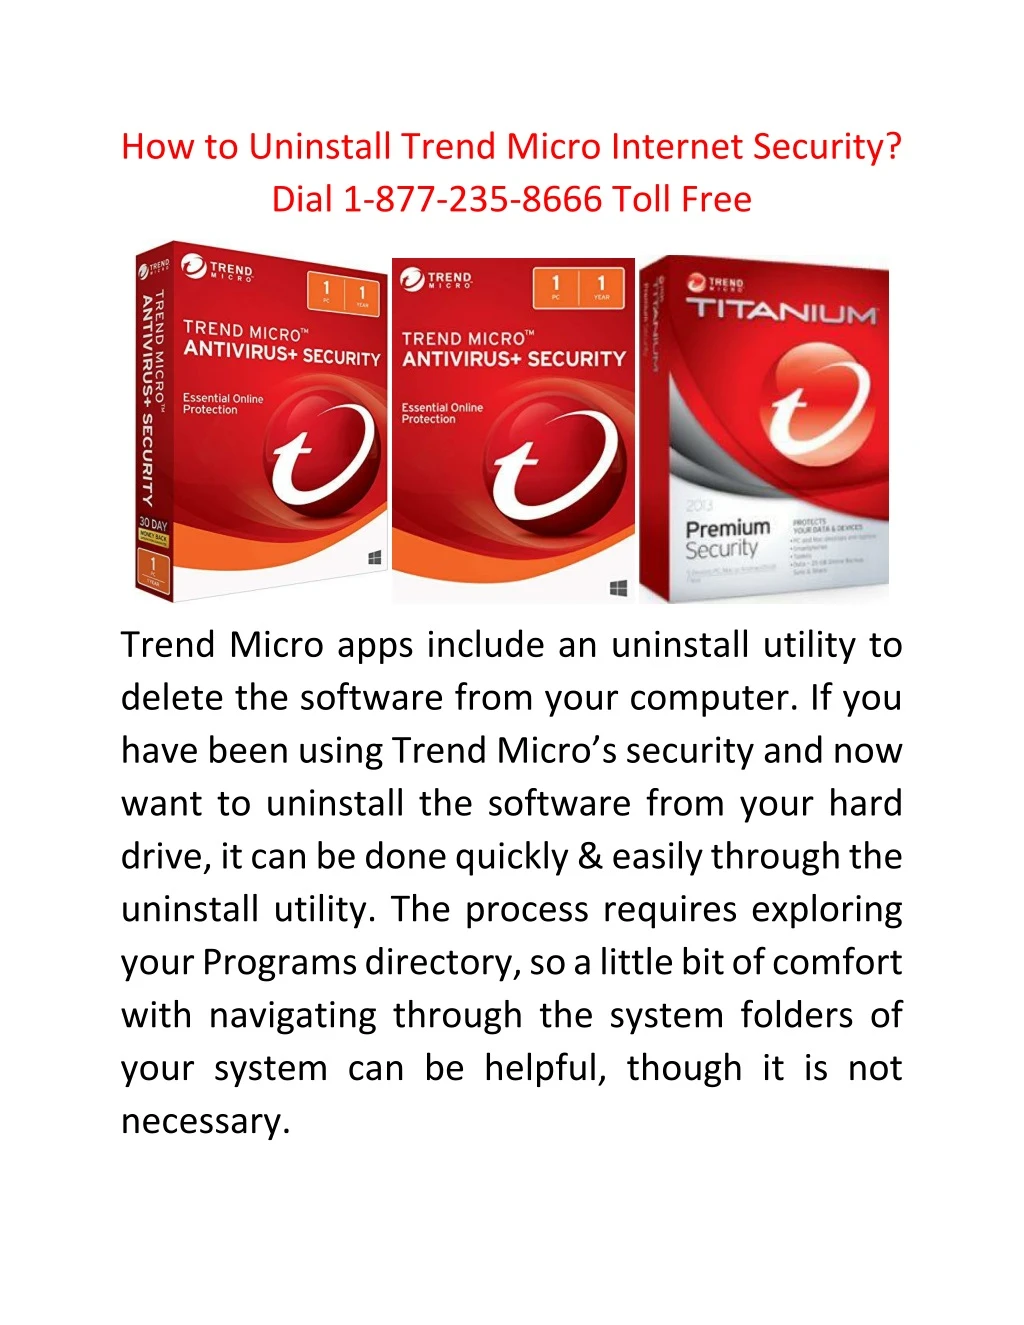 how to uninstall trend micro internet security